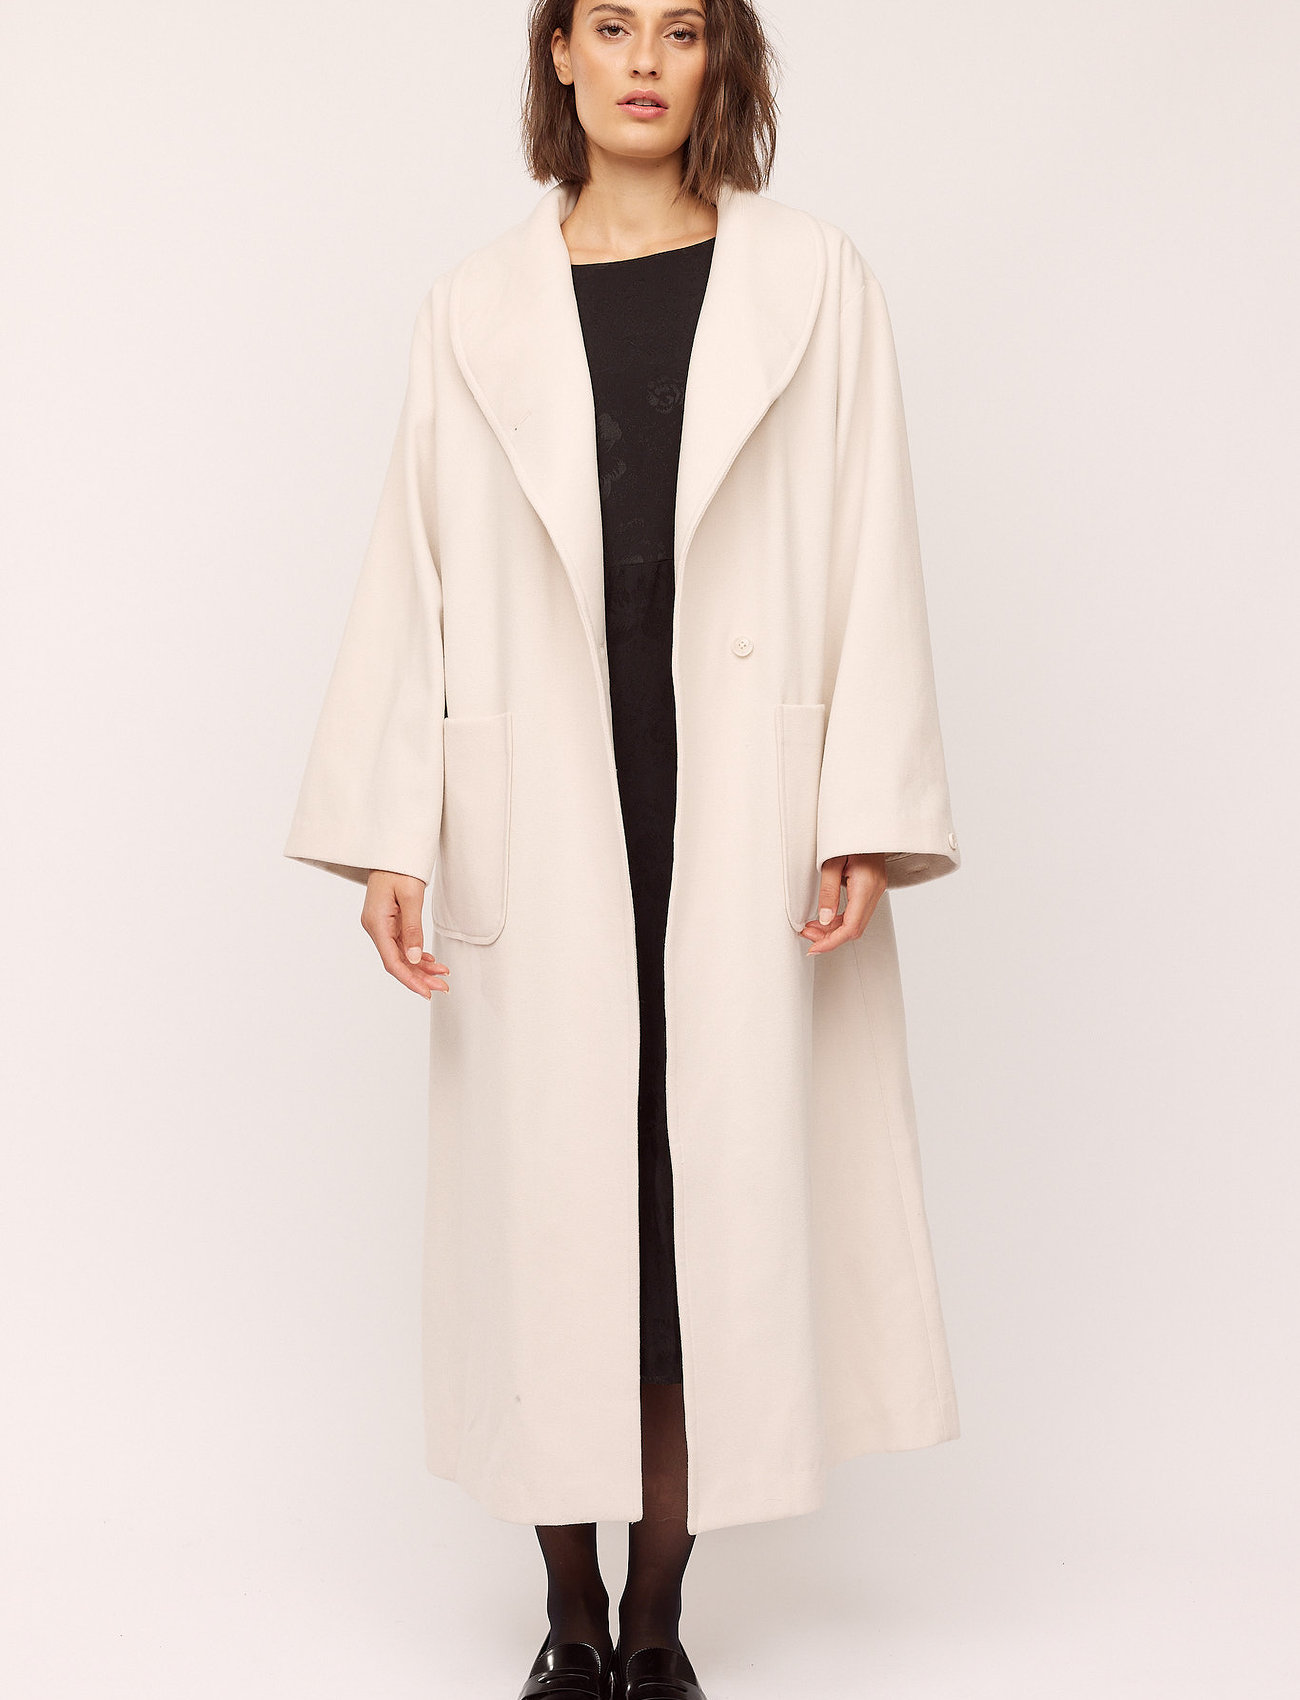 Once Untold - Camille Long Coat - winter coats - winter white - 1